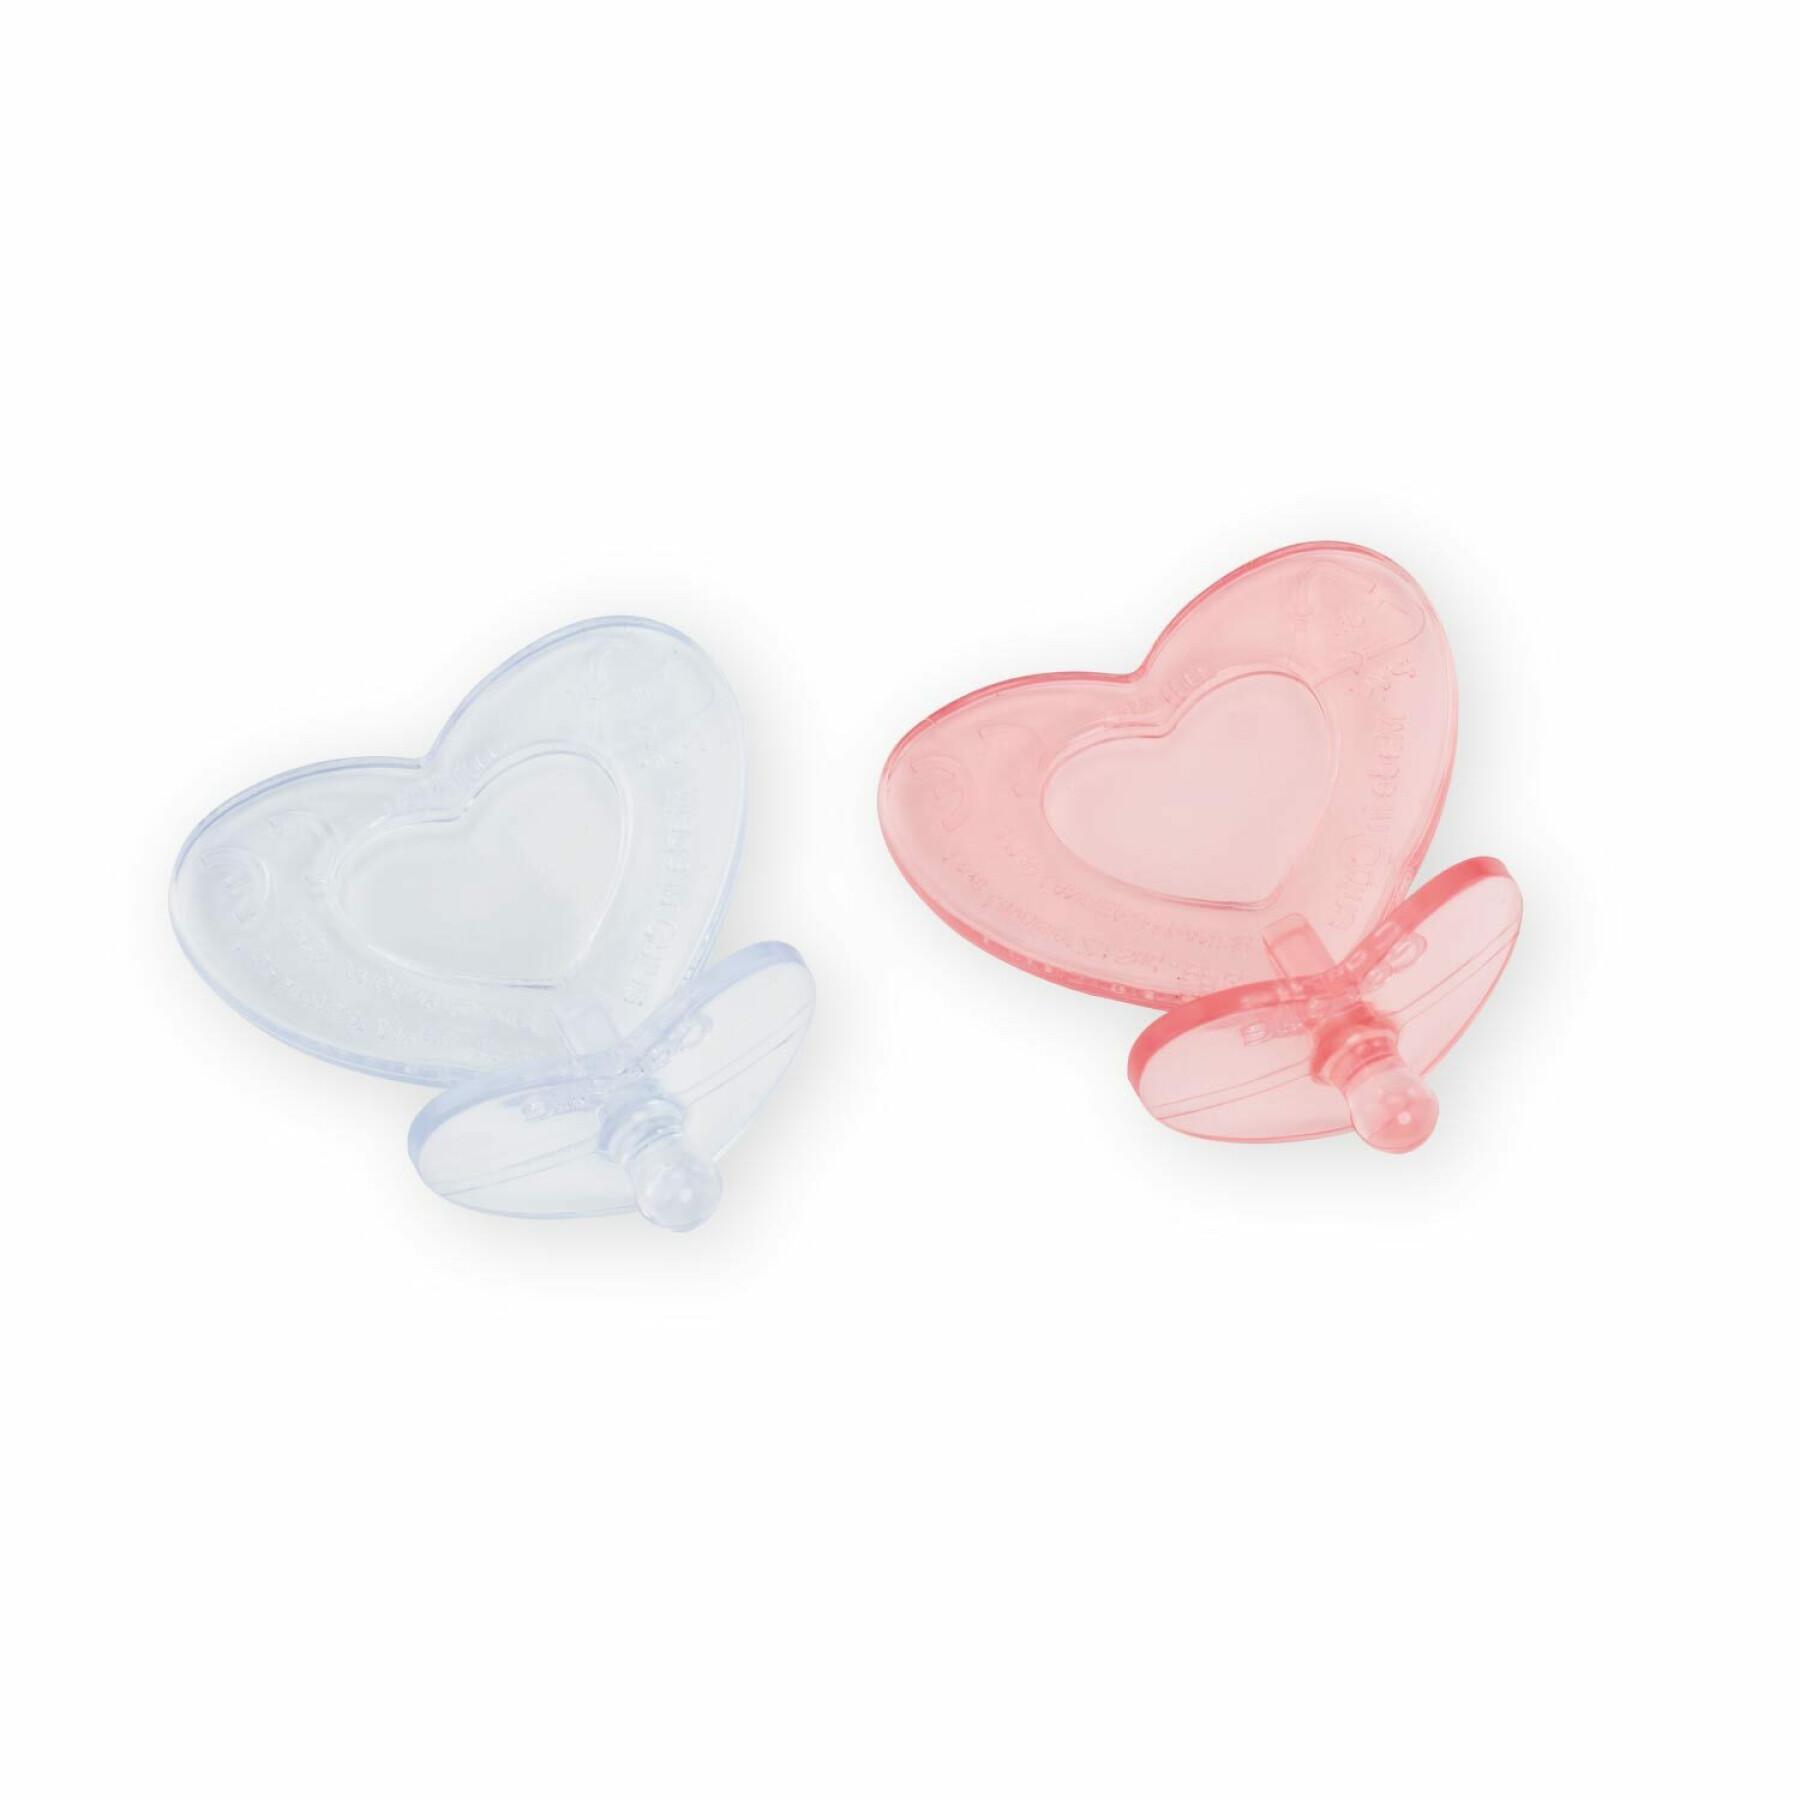 Set of 2 pacifiers for baby Corolle